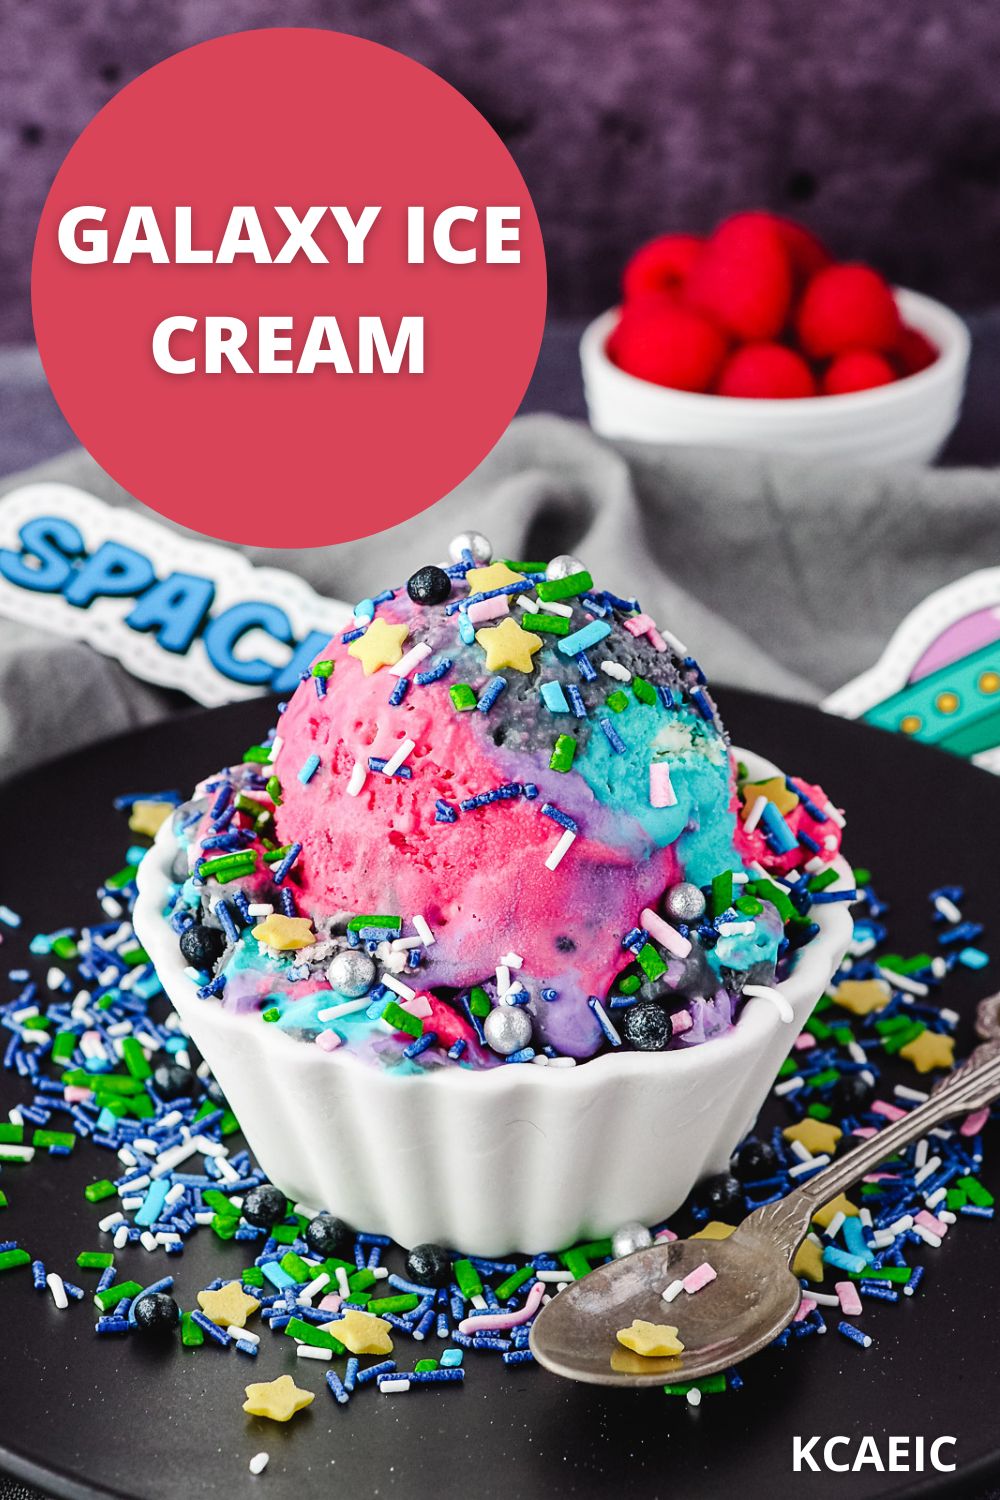 Scoop of ice cream with sprinkles, on a plate with spoon and sprinkles, and text overlay.